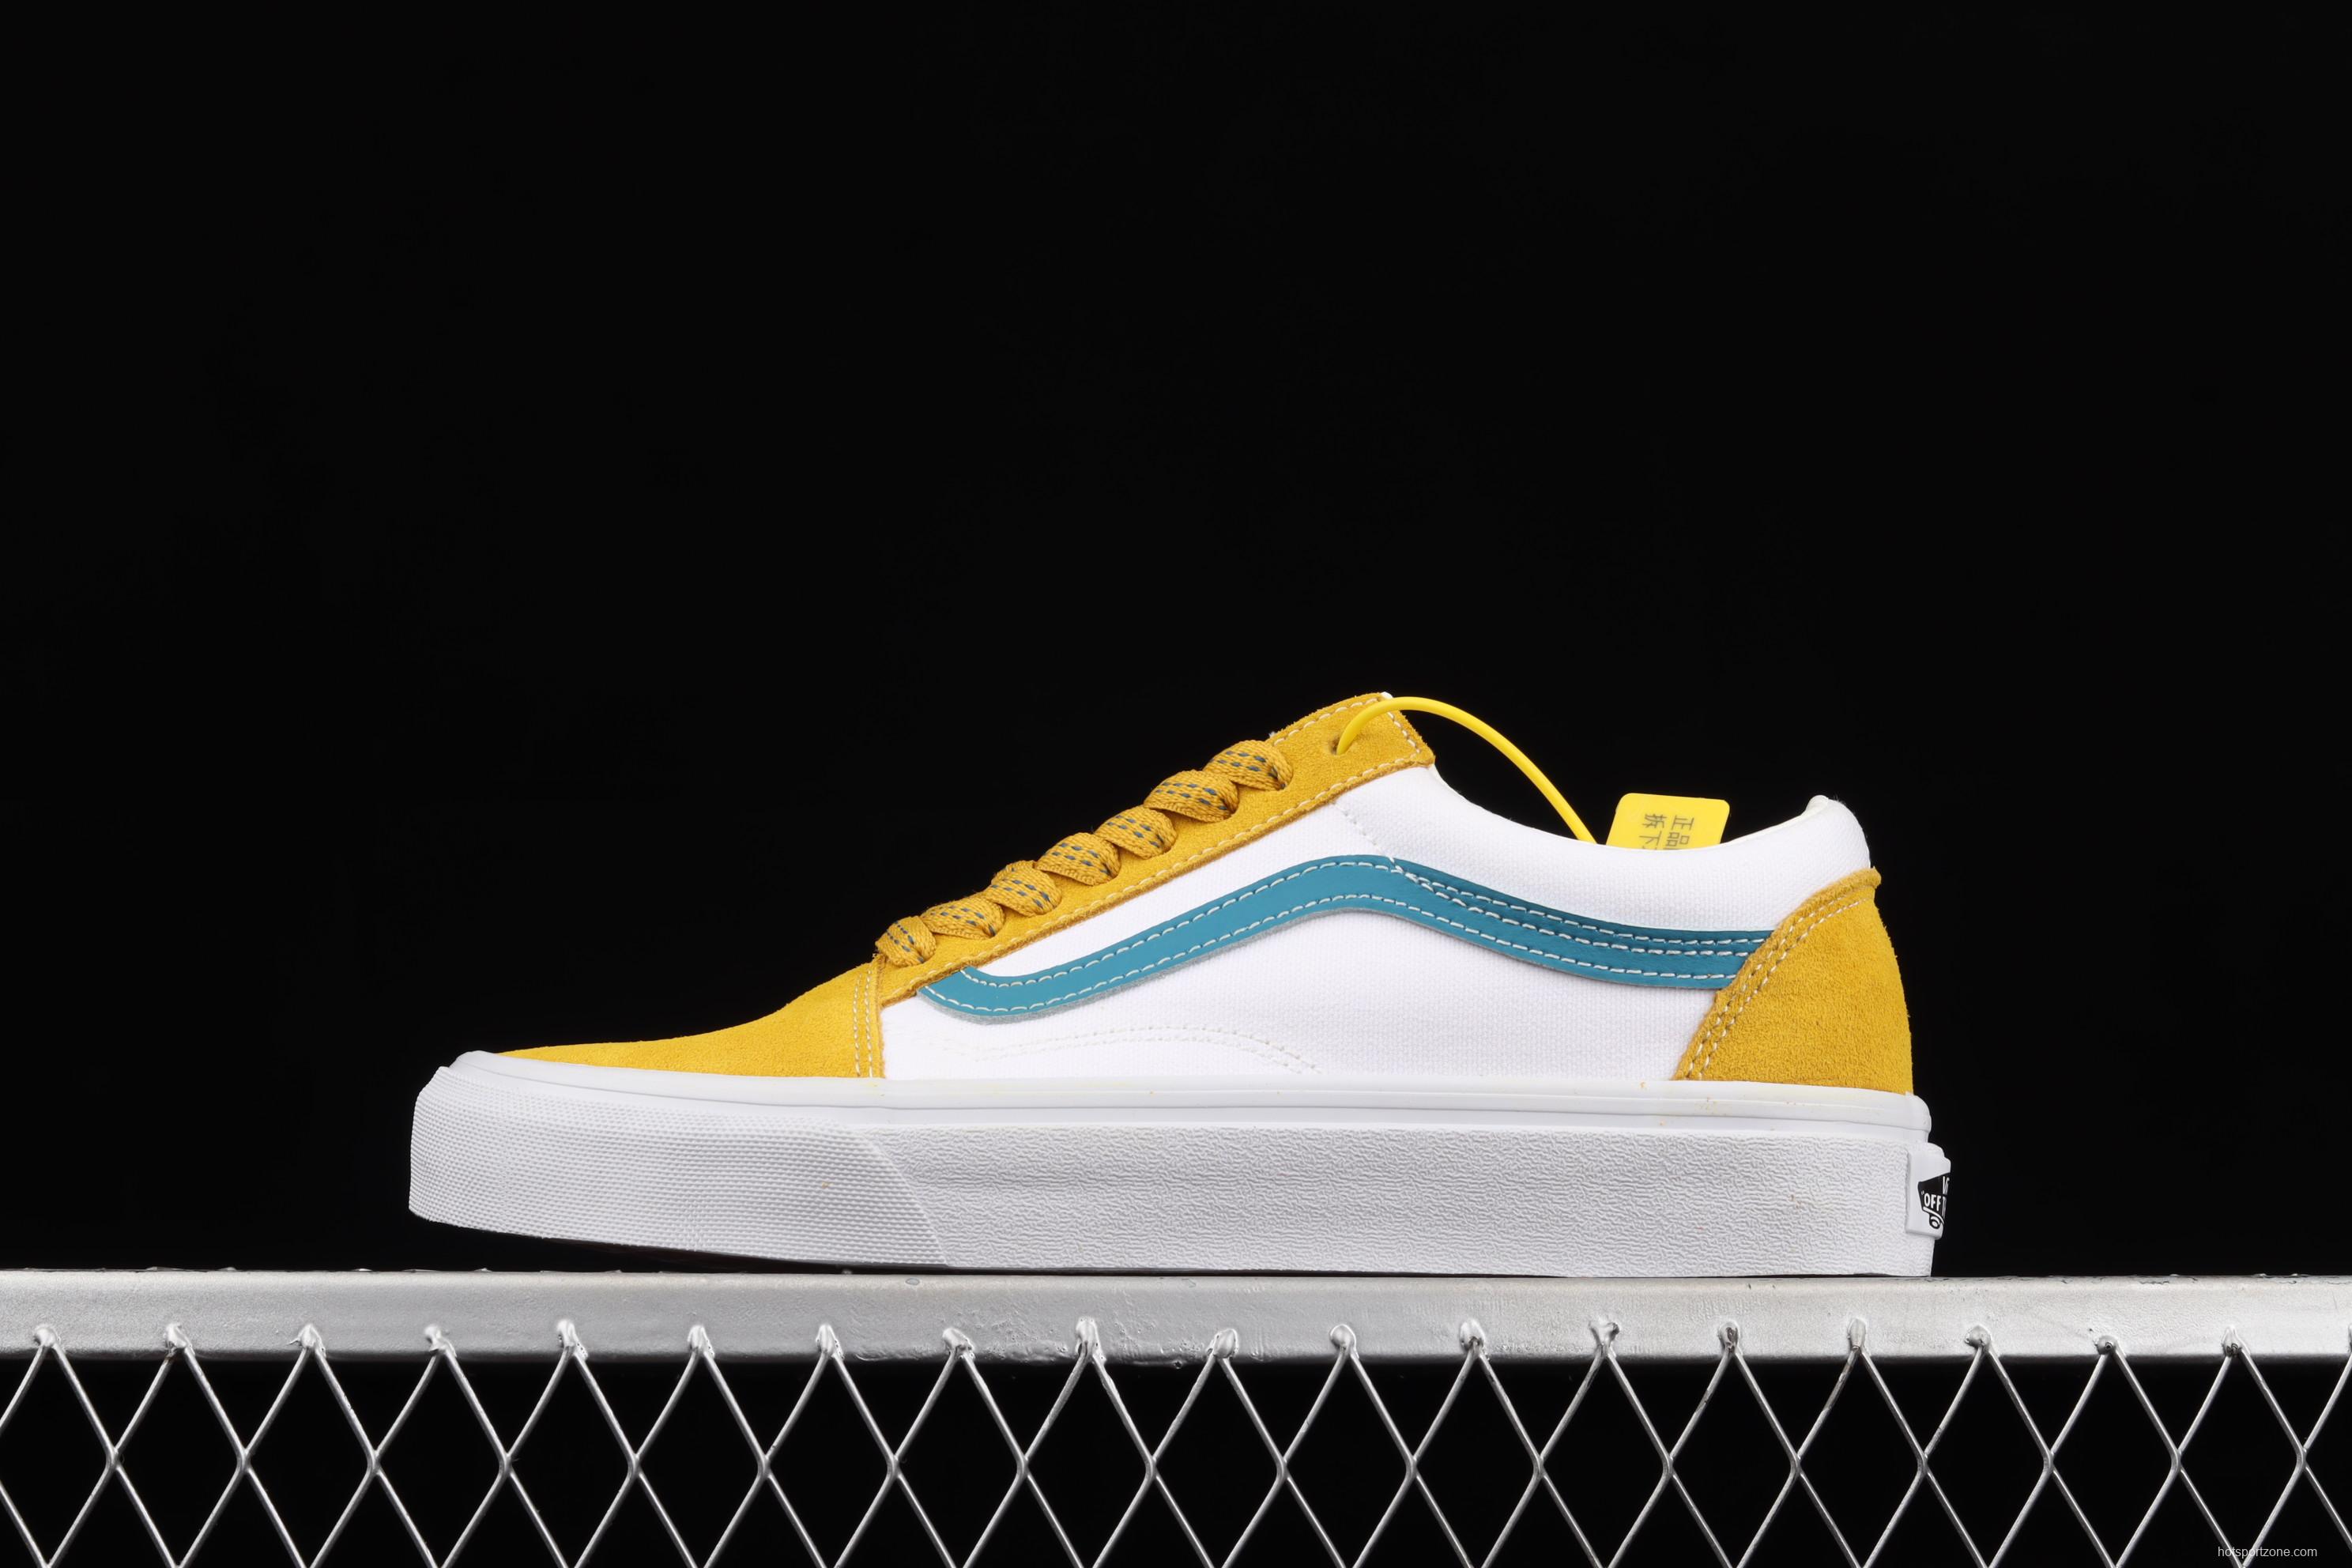 Vans Old Skool official website correct version 2021 orange soda 2.0low-top casual board shoes VN0A38G19XF